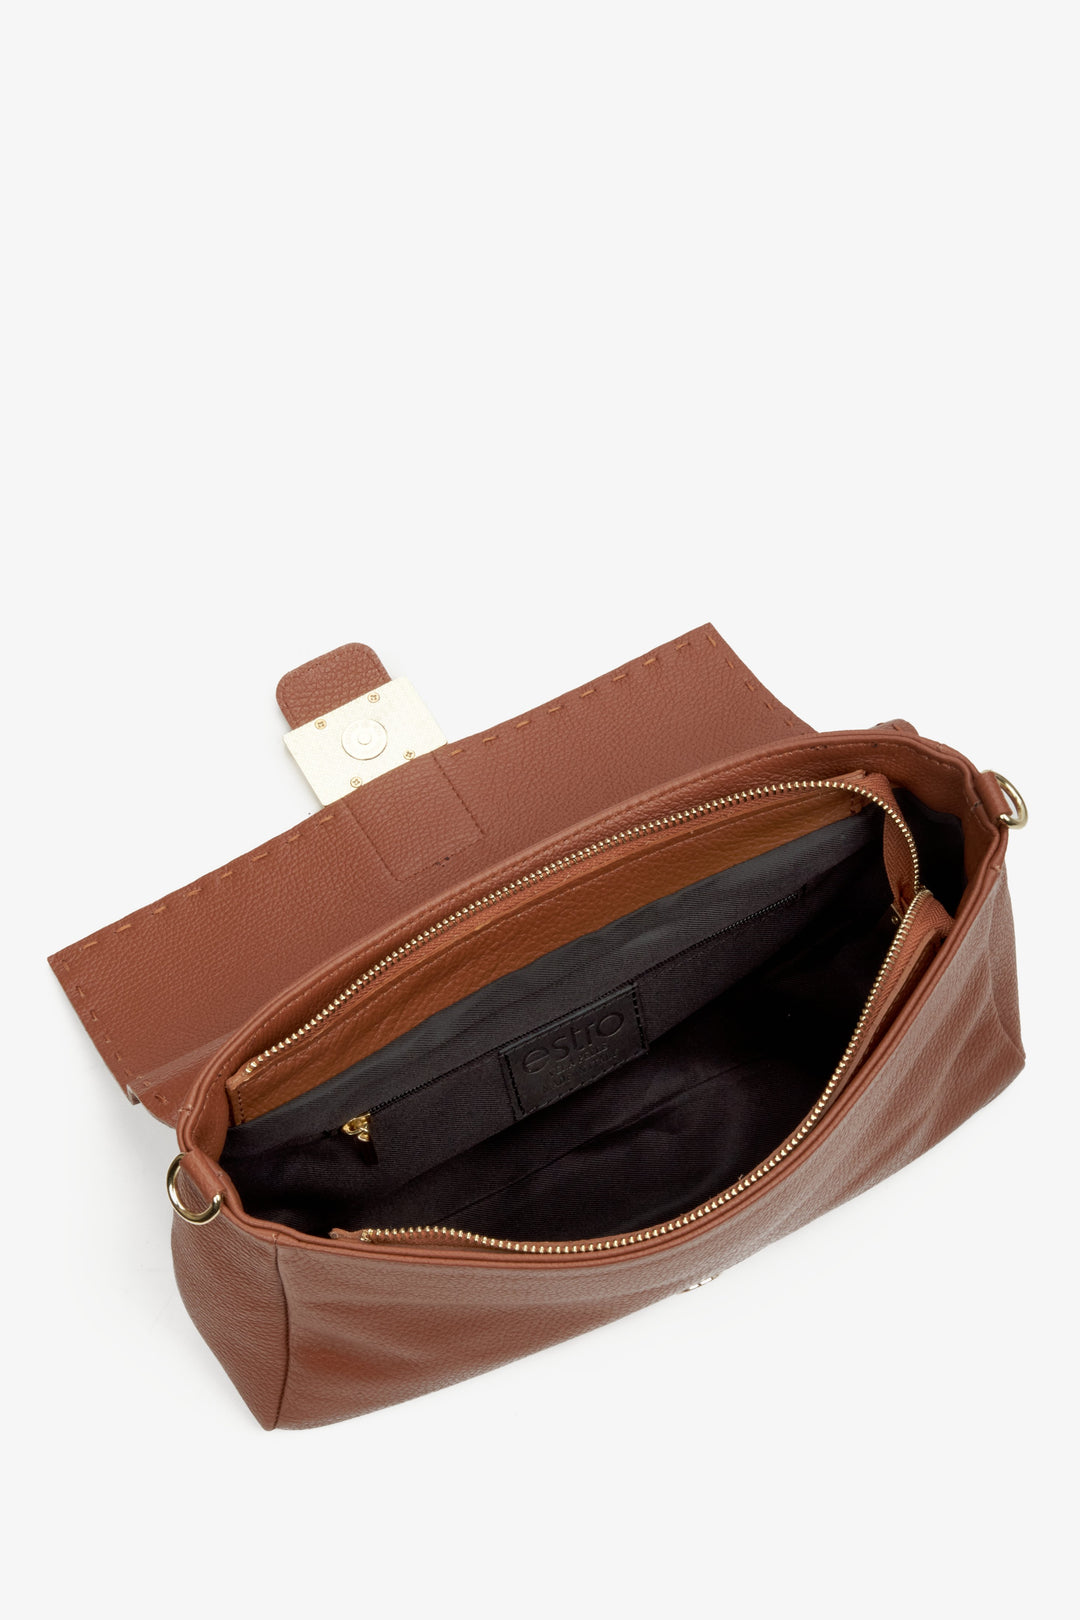 Women's brown  handbag made of Italian genuine leather by Estro - close-up on the interior of the model.